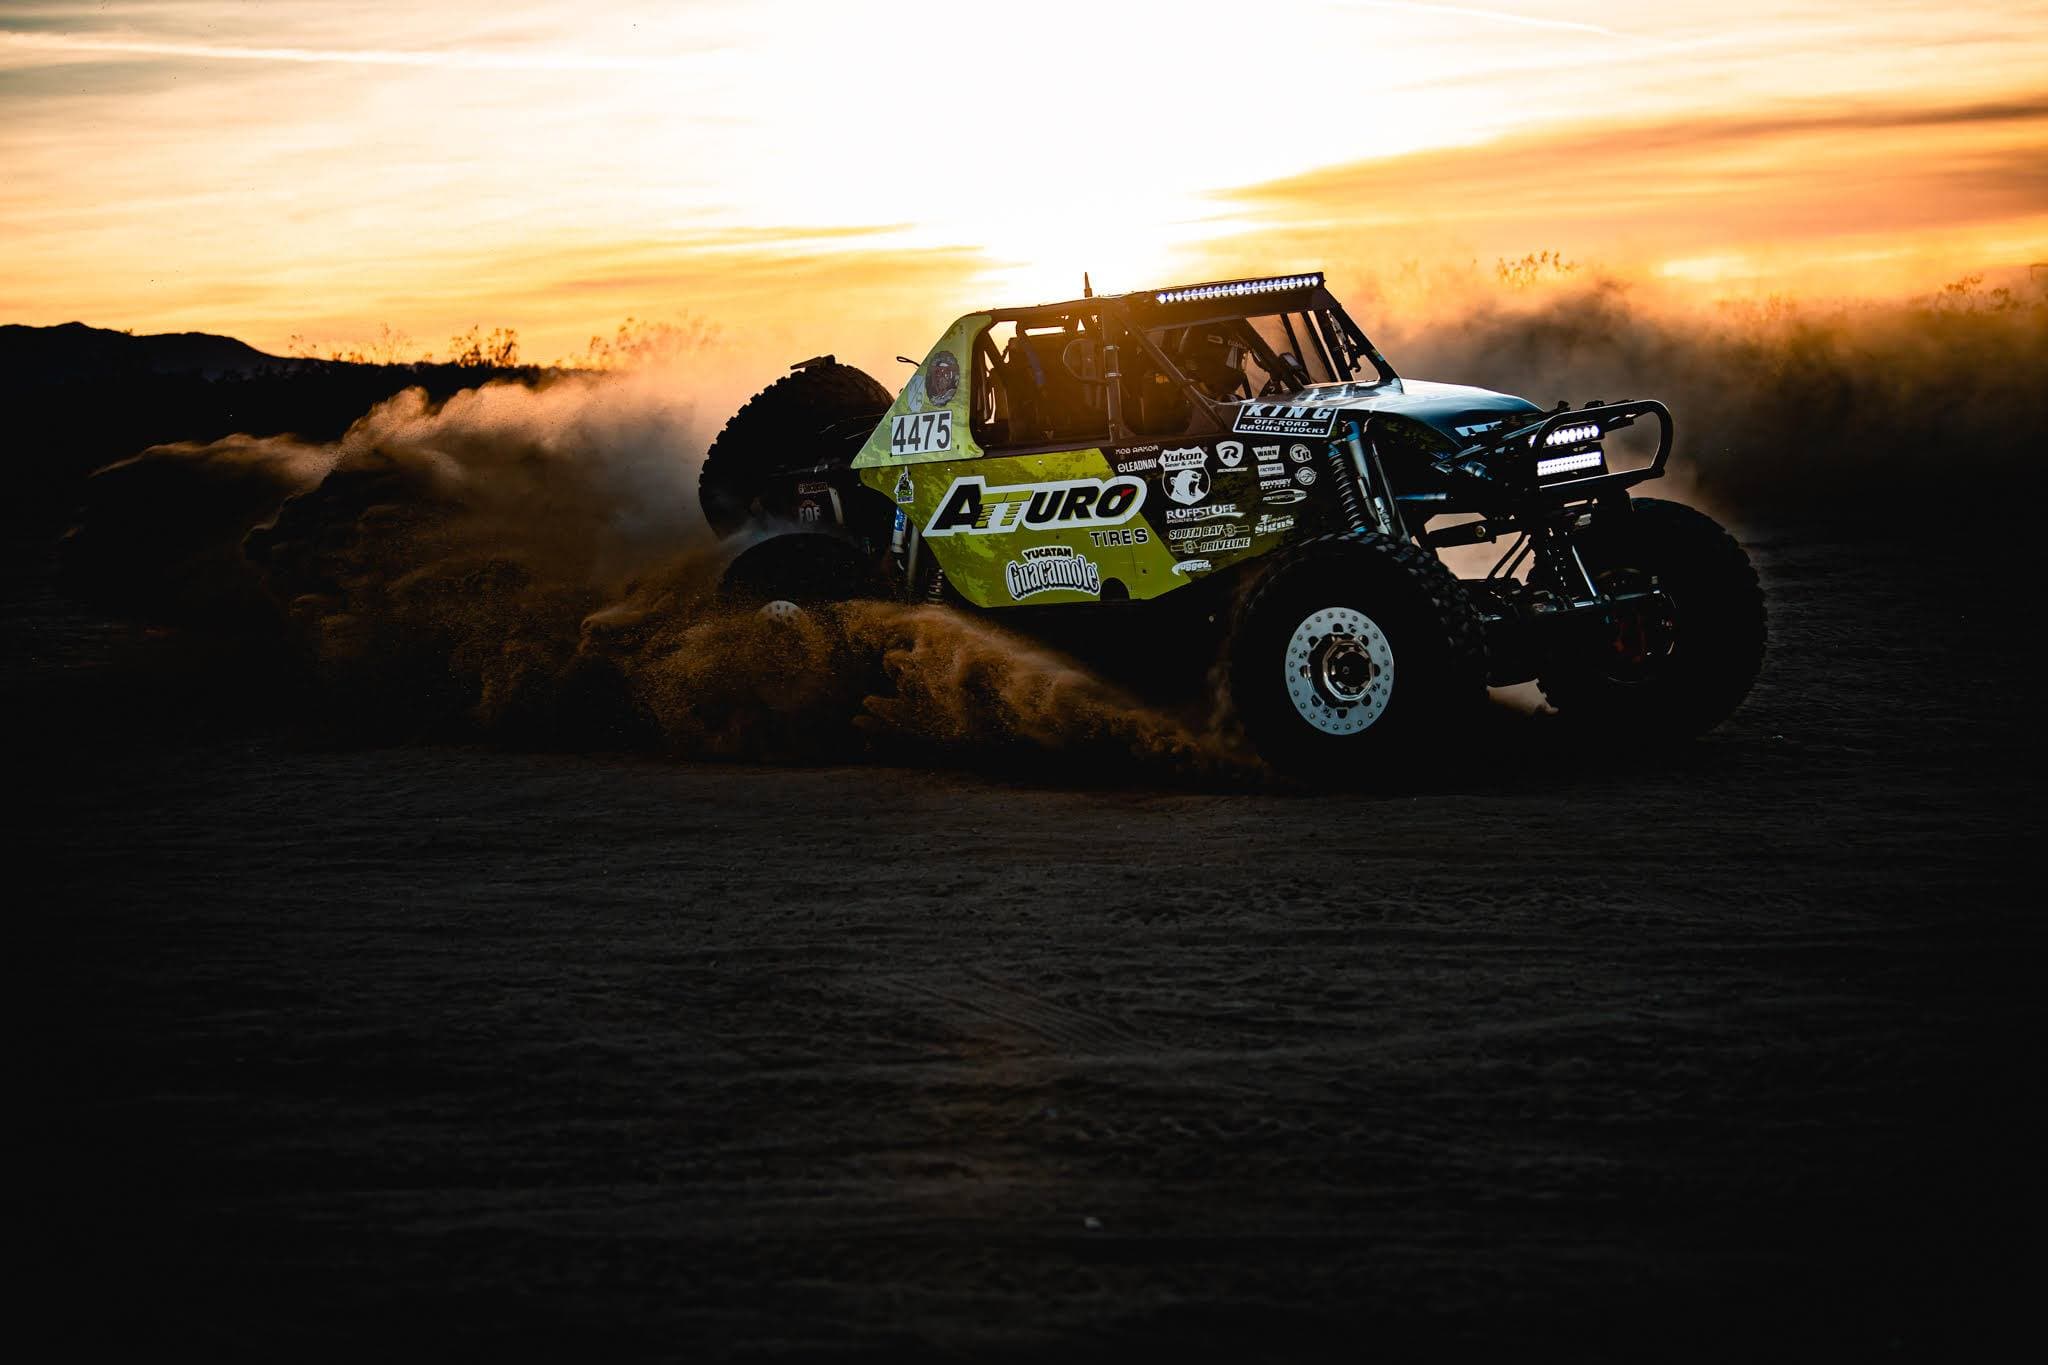 ATTURO’S TRAIL BLADE BOSS TIRE READY TO AGAIN TAKE ON ‘THE WORLD’S TOUGHEST OFF-ROAD RACE’